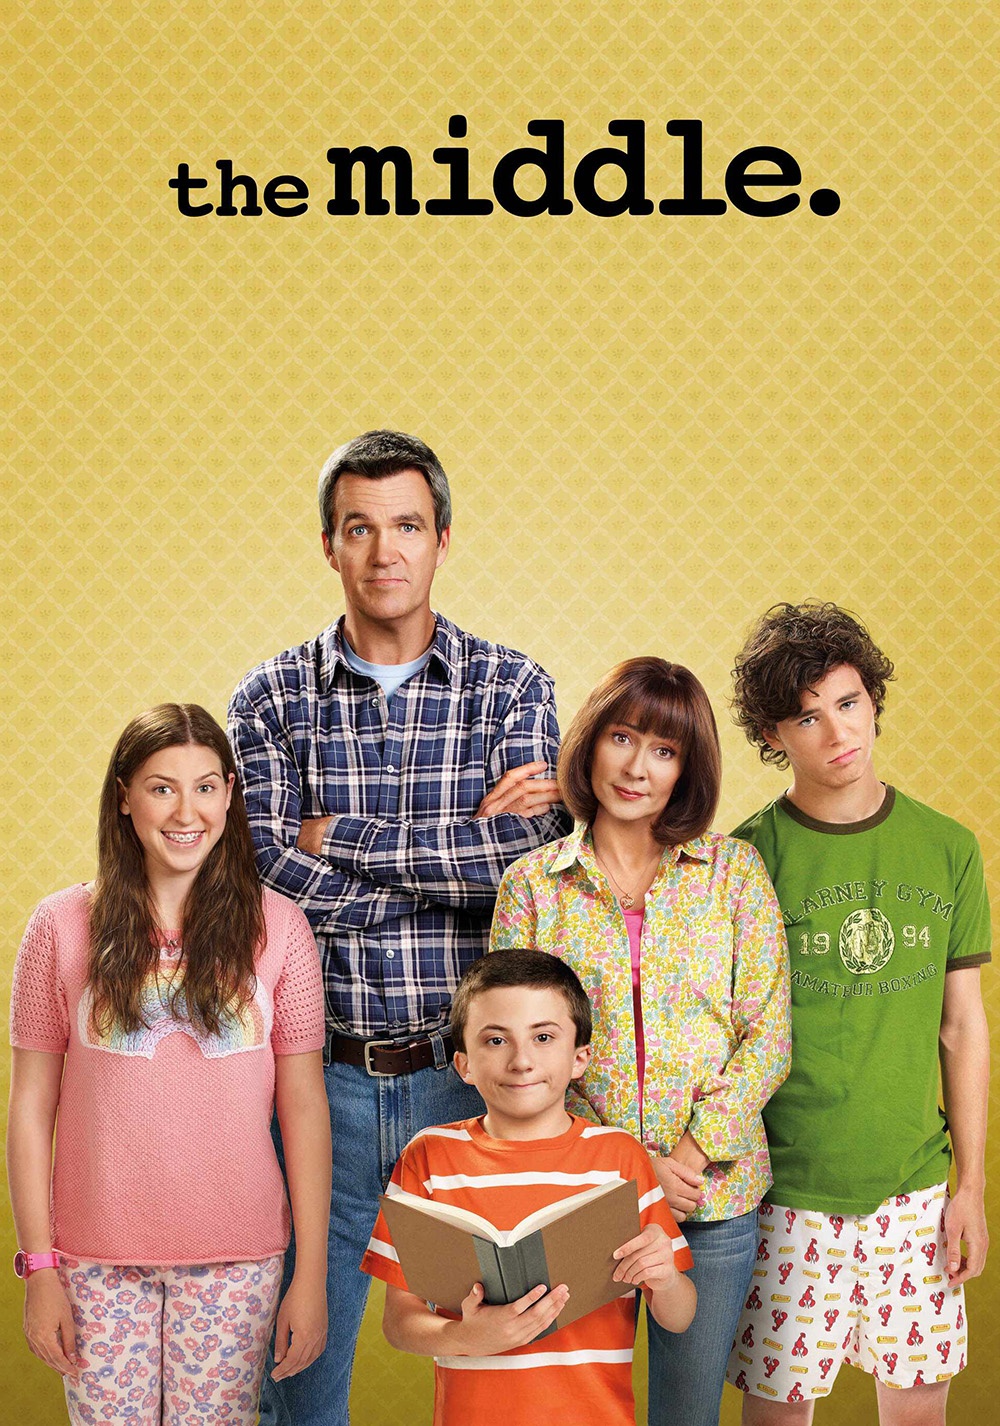 Why American Sitcom “The Middle” is One of the Best Family Comedies Ever 9